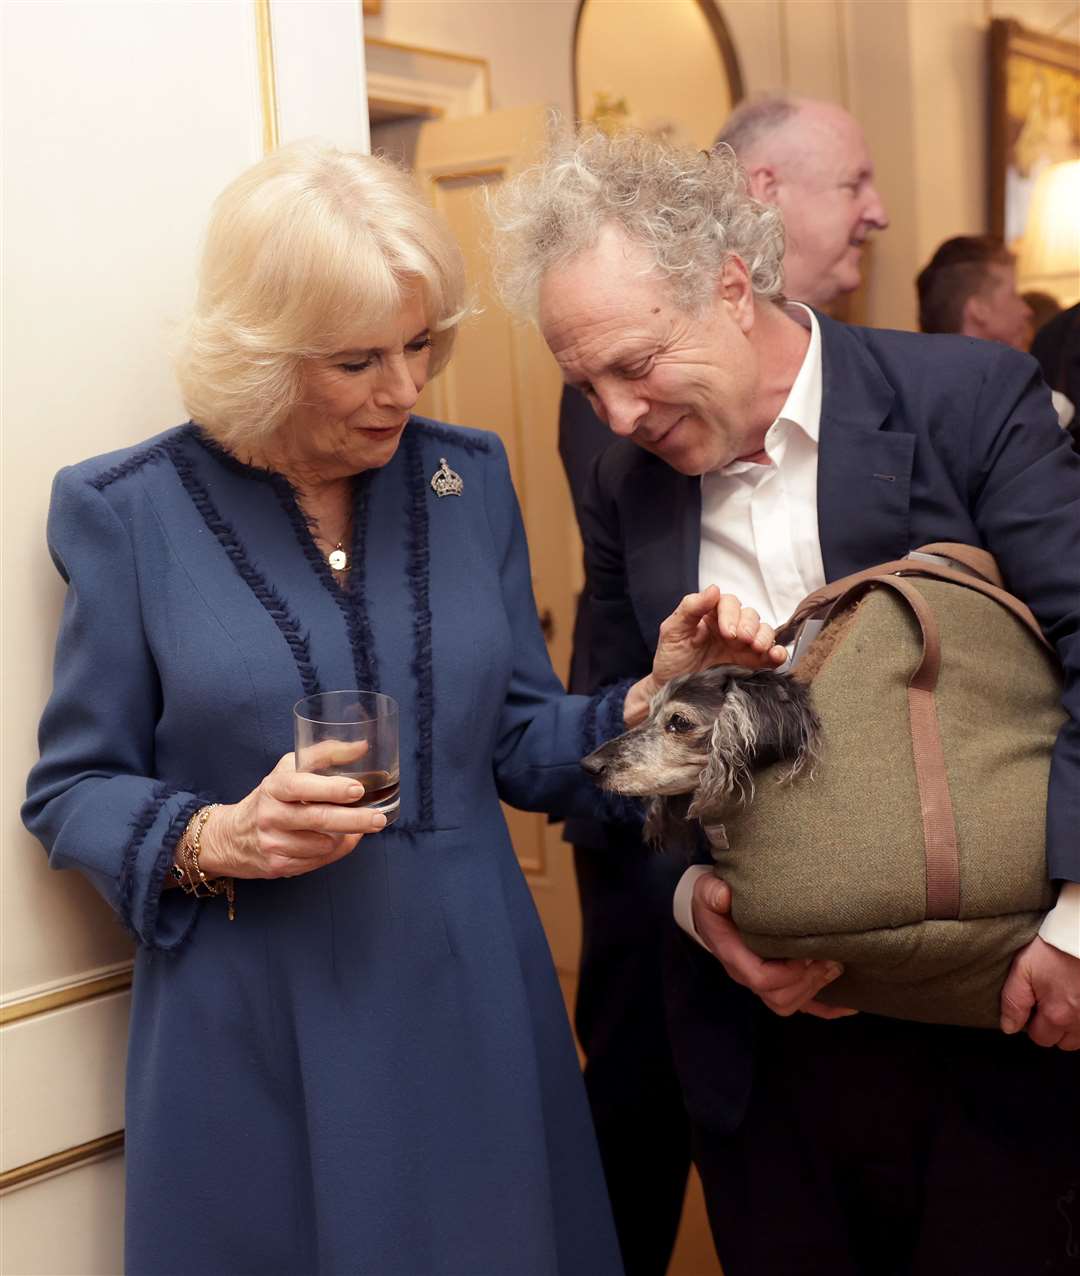 The Queen Consort meets author Charlie Mackesy and his dog Barney (Chris Jackson/PA)